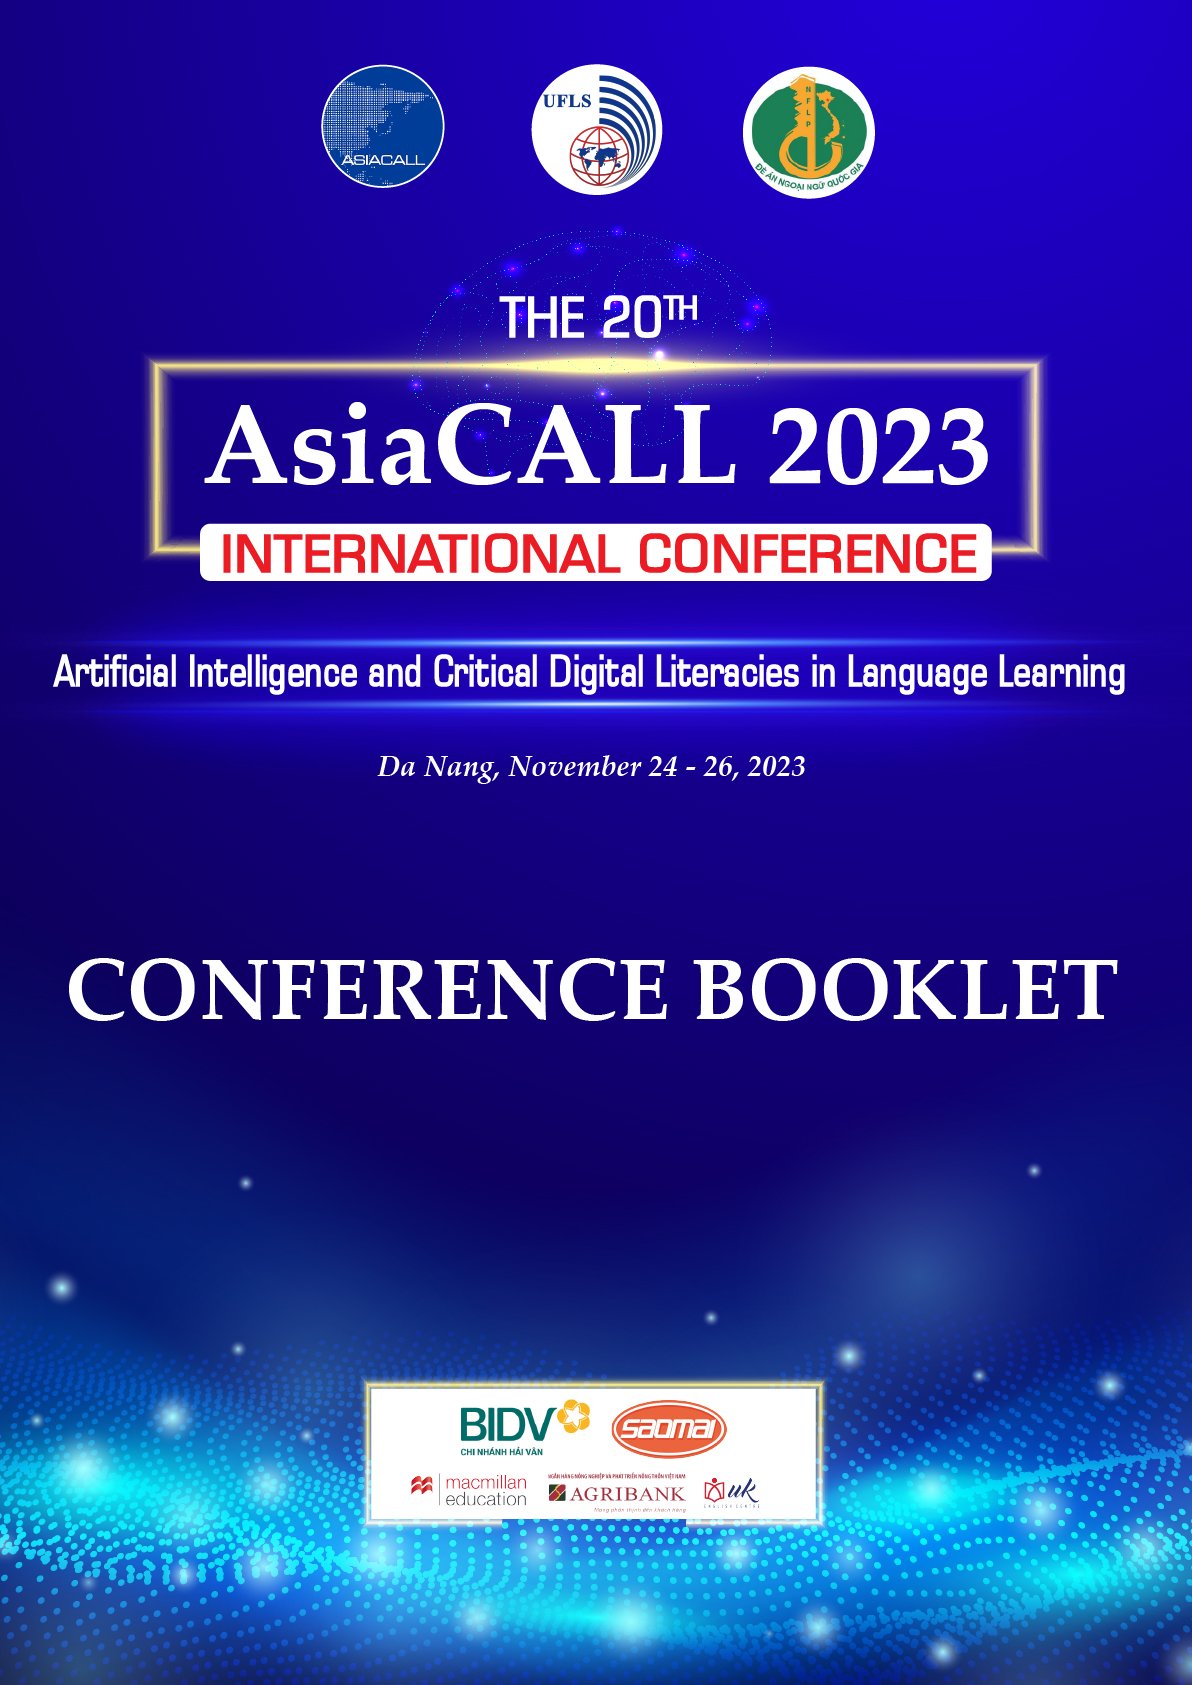                     View Vol. 3 (2023): Conference Booklet of the 20th AsiaCALL International Conference (AsiaCALL2023)
                